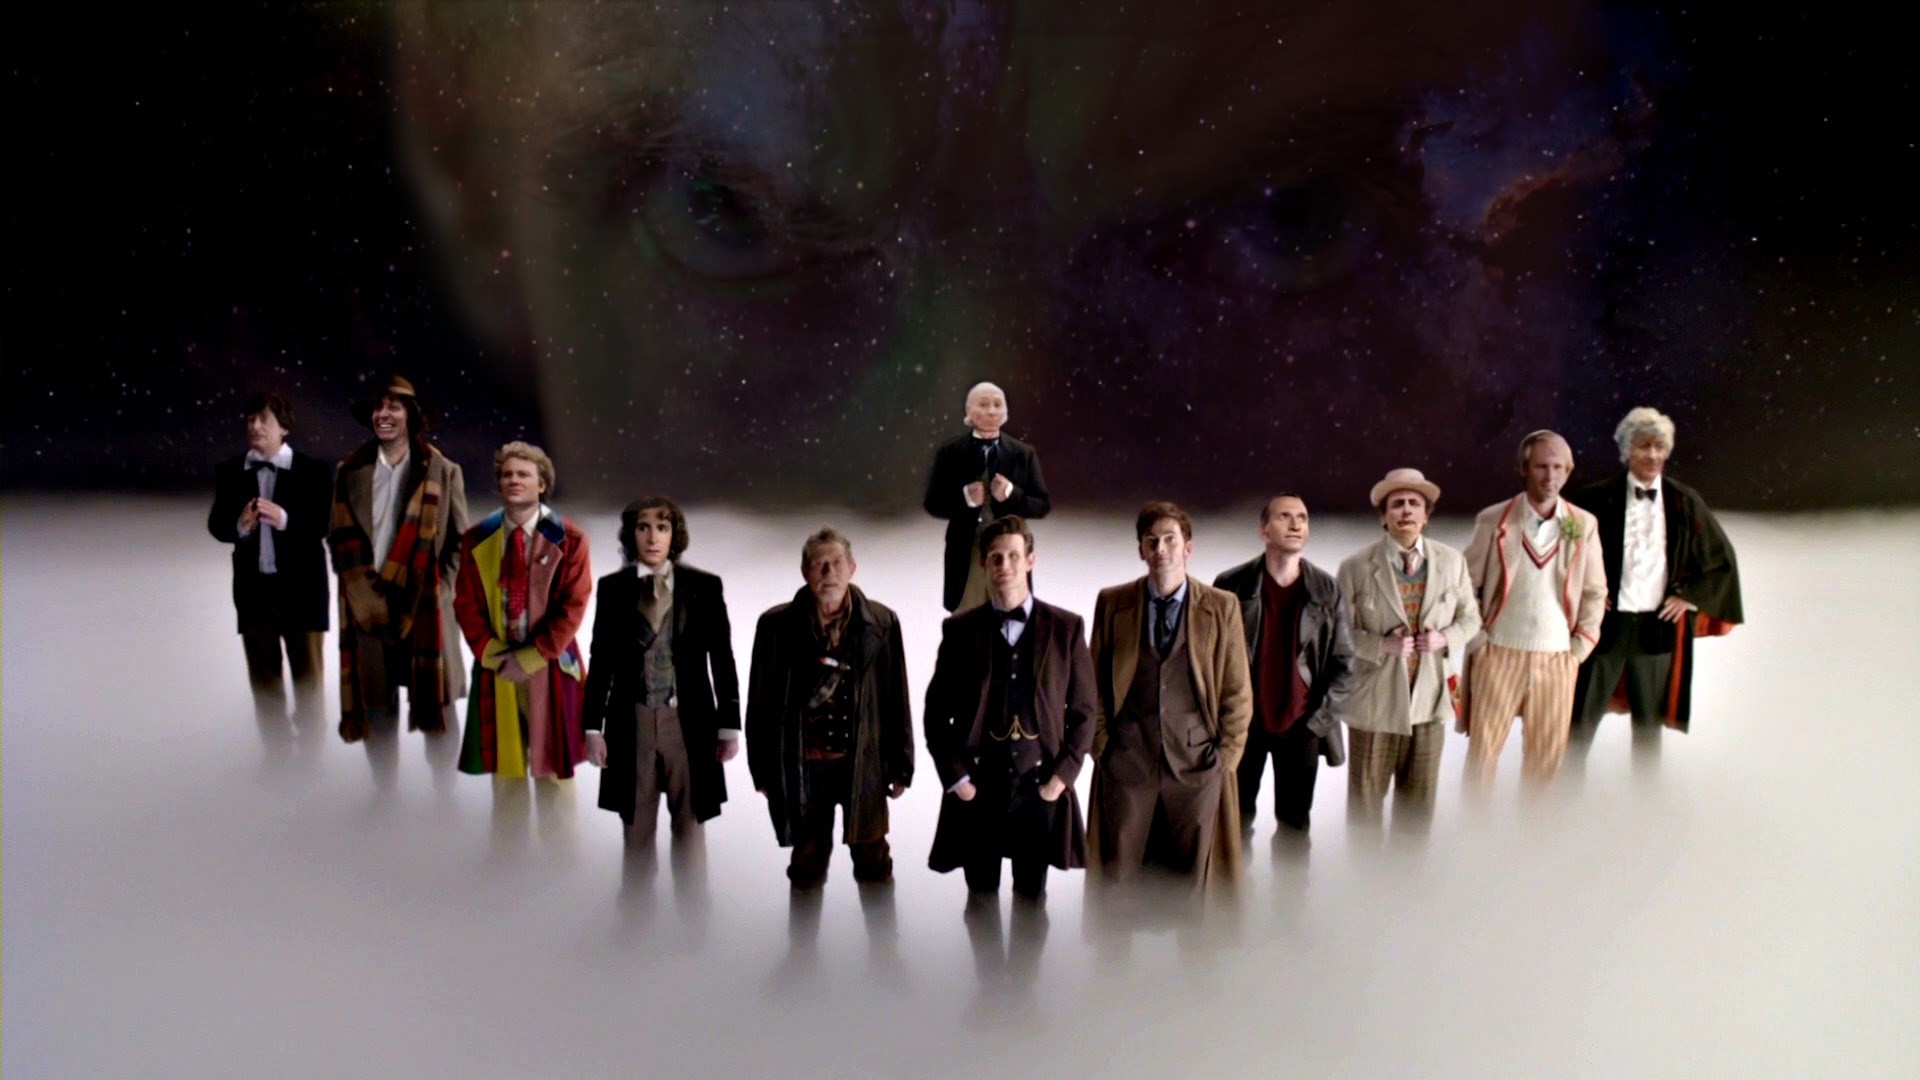 doctor who picture free hd widescreen, 214 kB – Harlow Jacobson